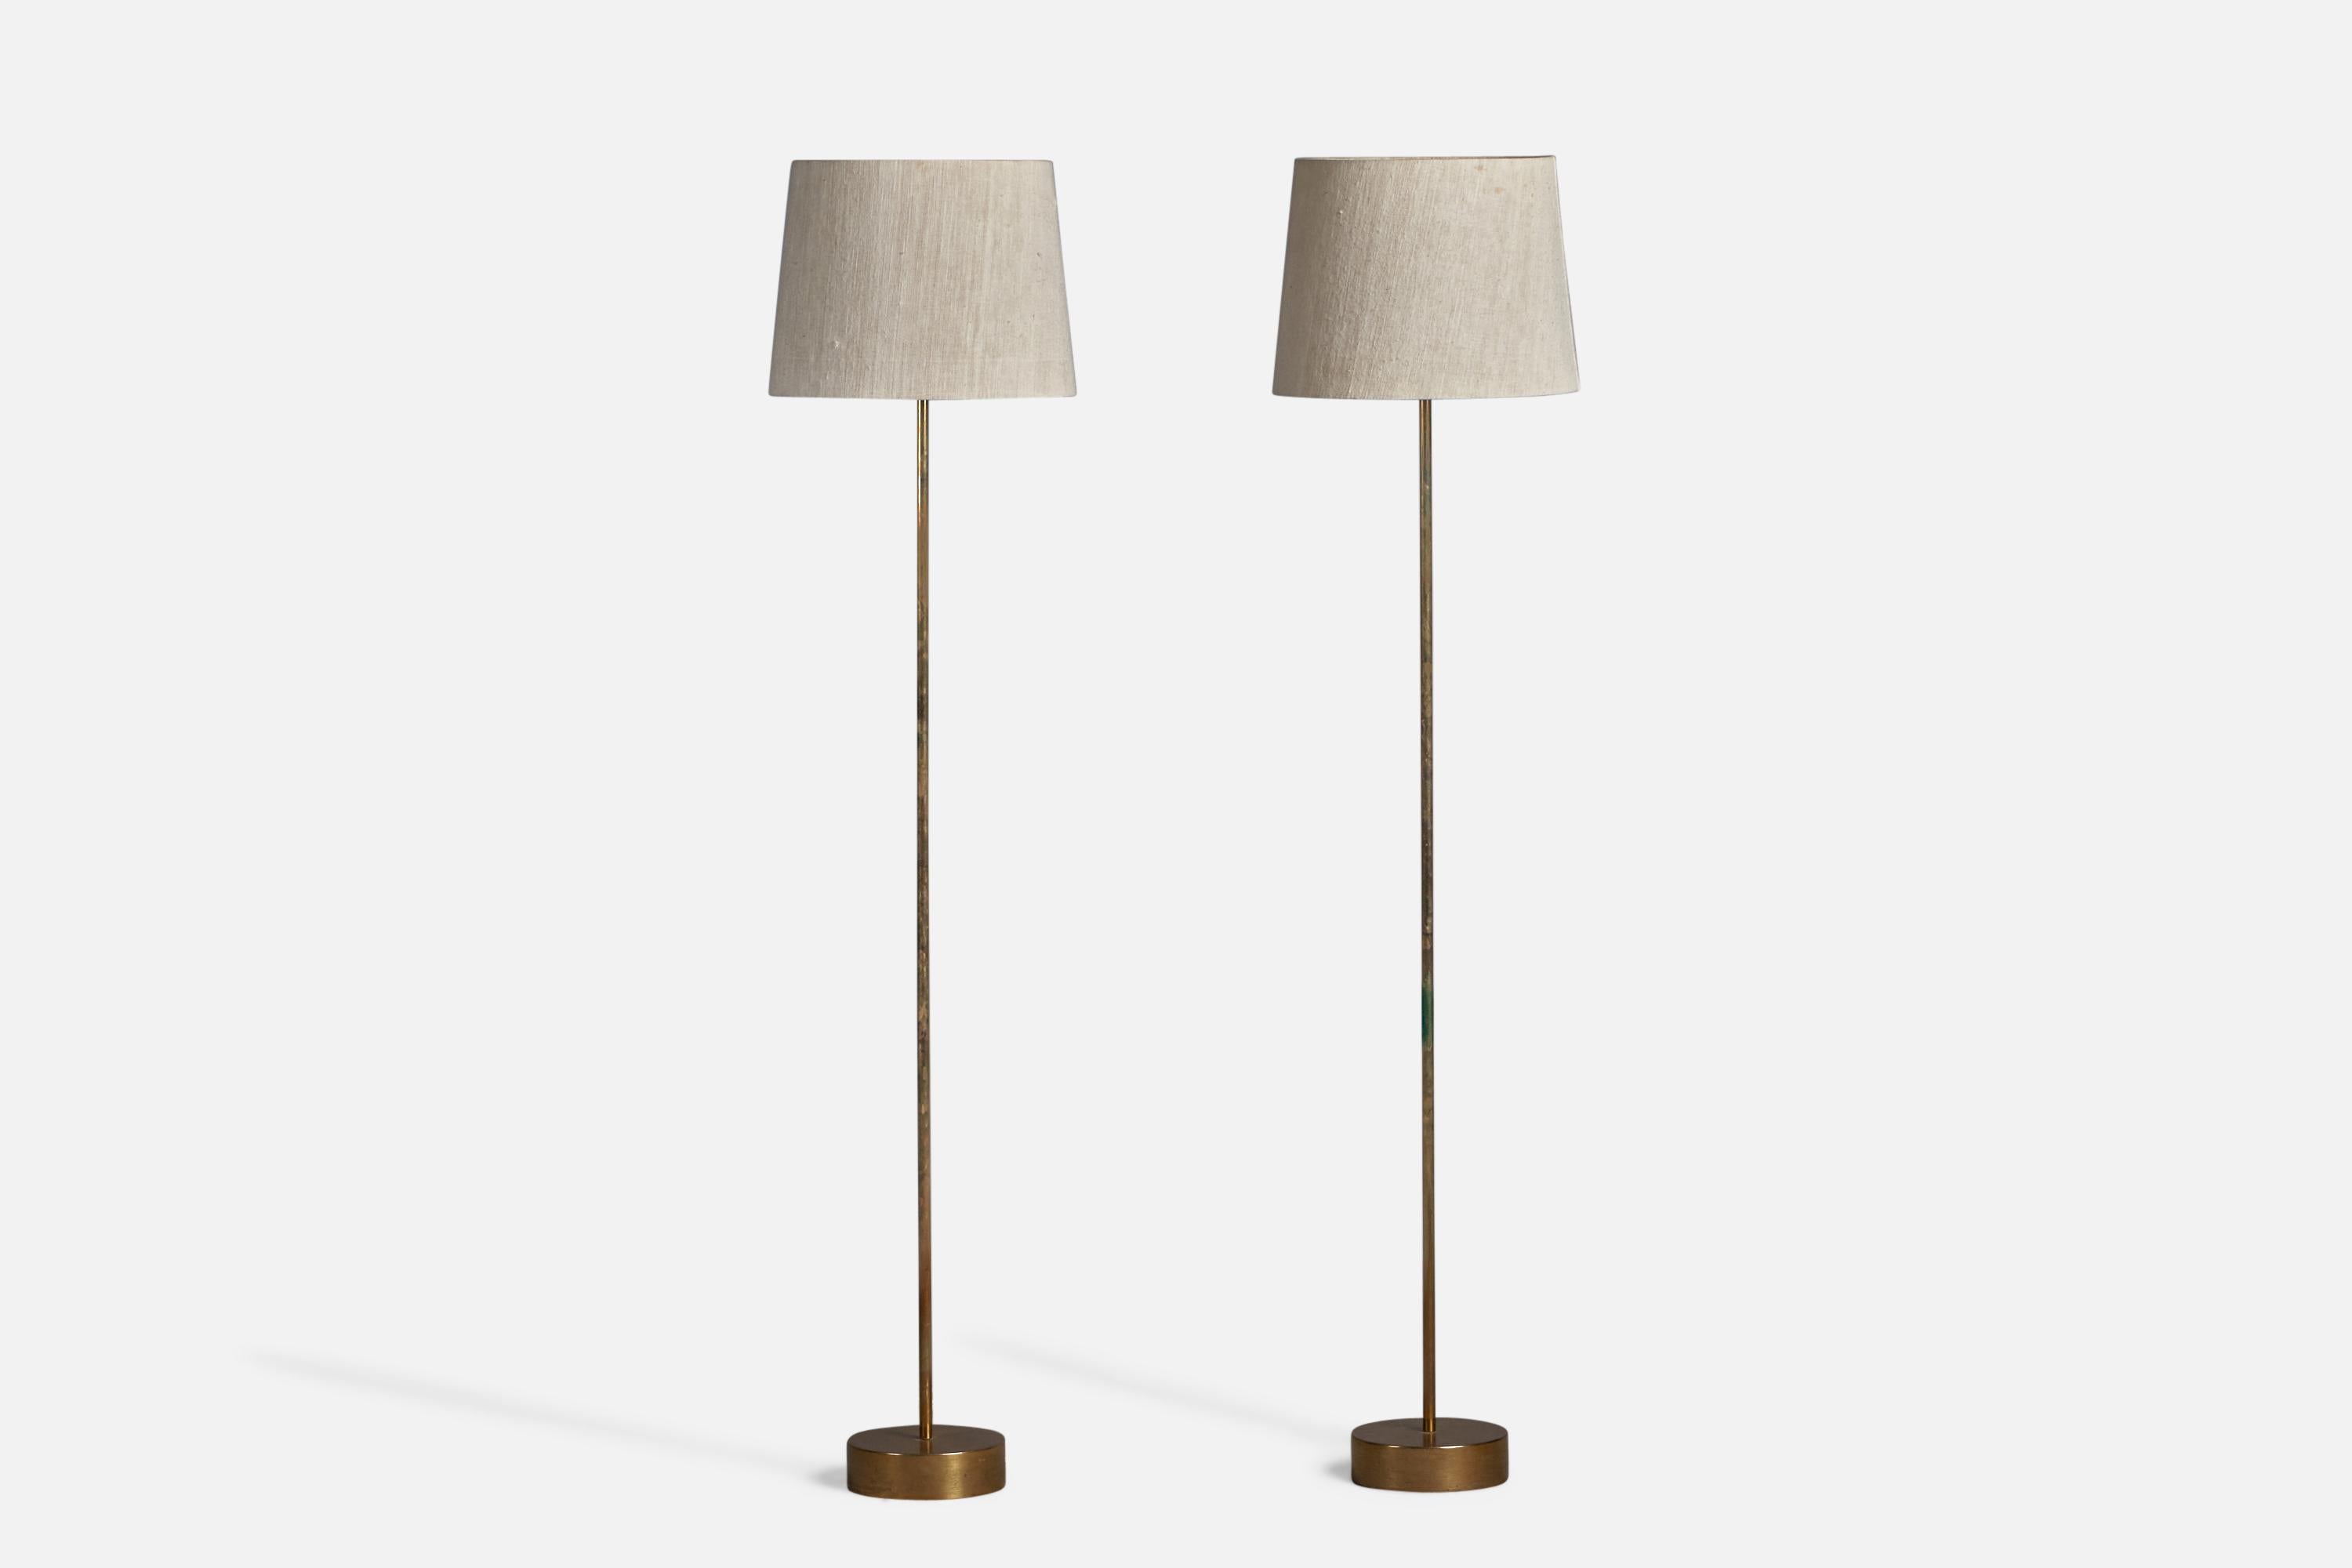 A pair of brass, acrylic and woven light beige fabric floor lamps, designed and produced in Sweden, 1950s.

Overall Dimensions (inches): 55.25